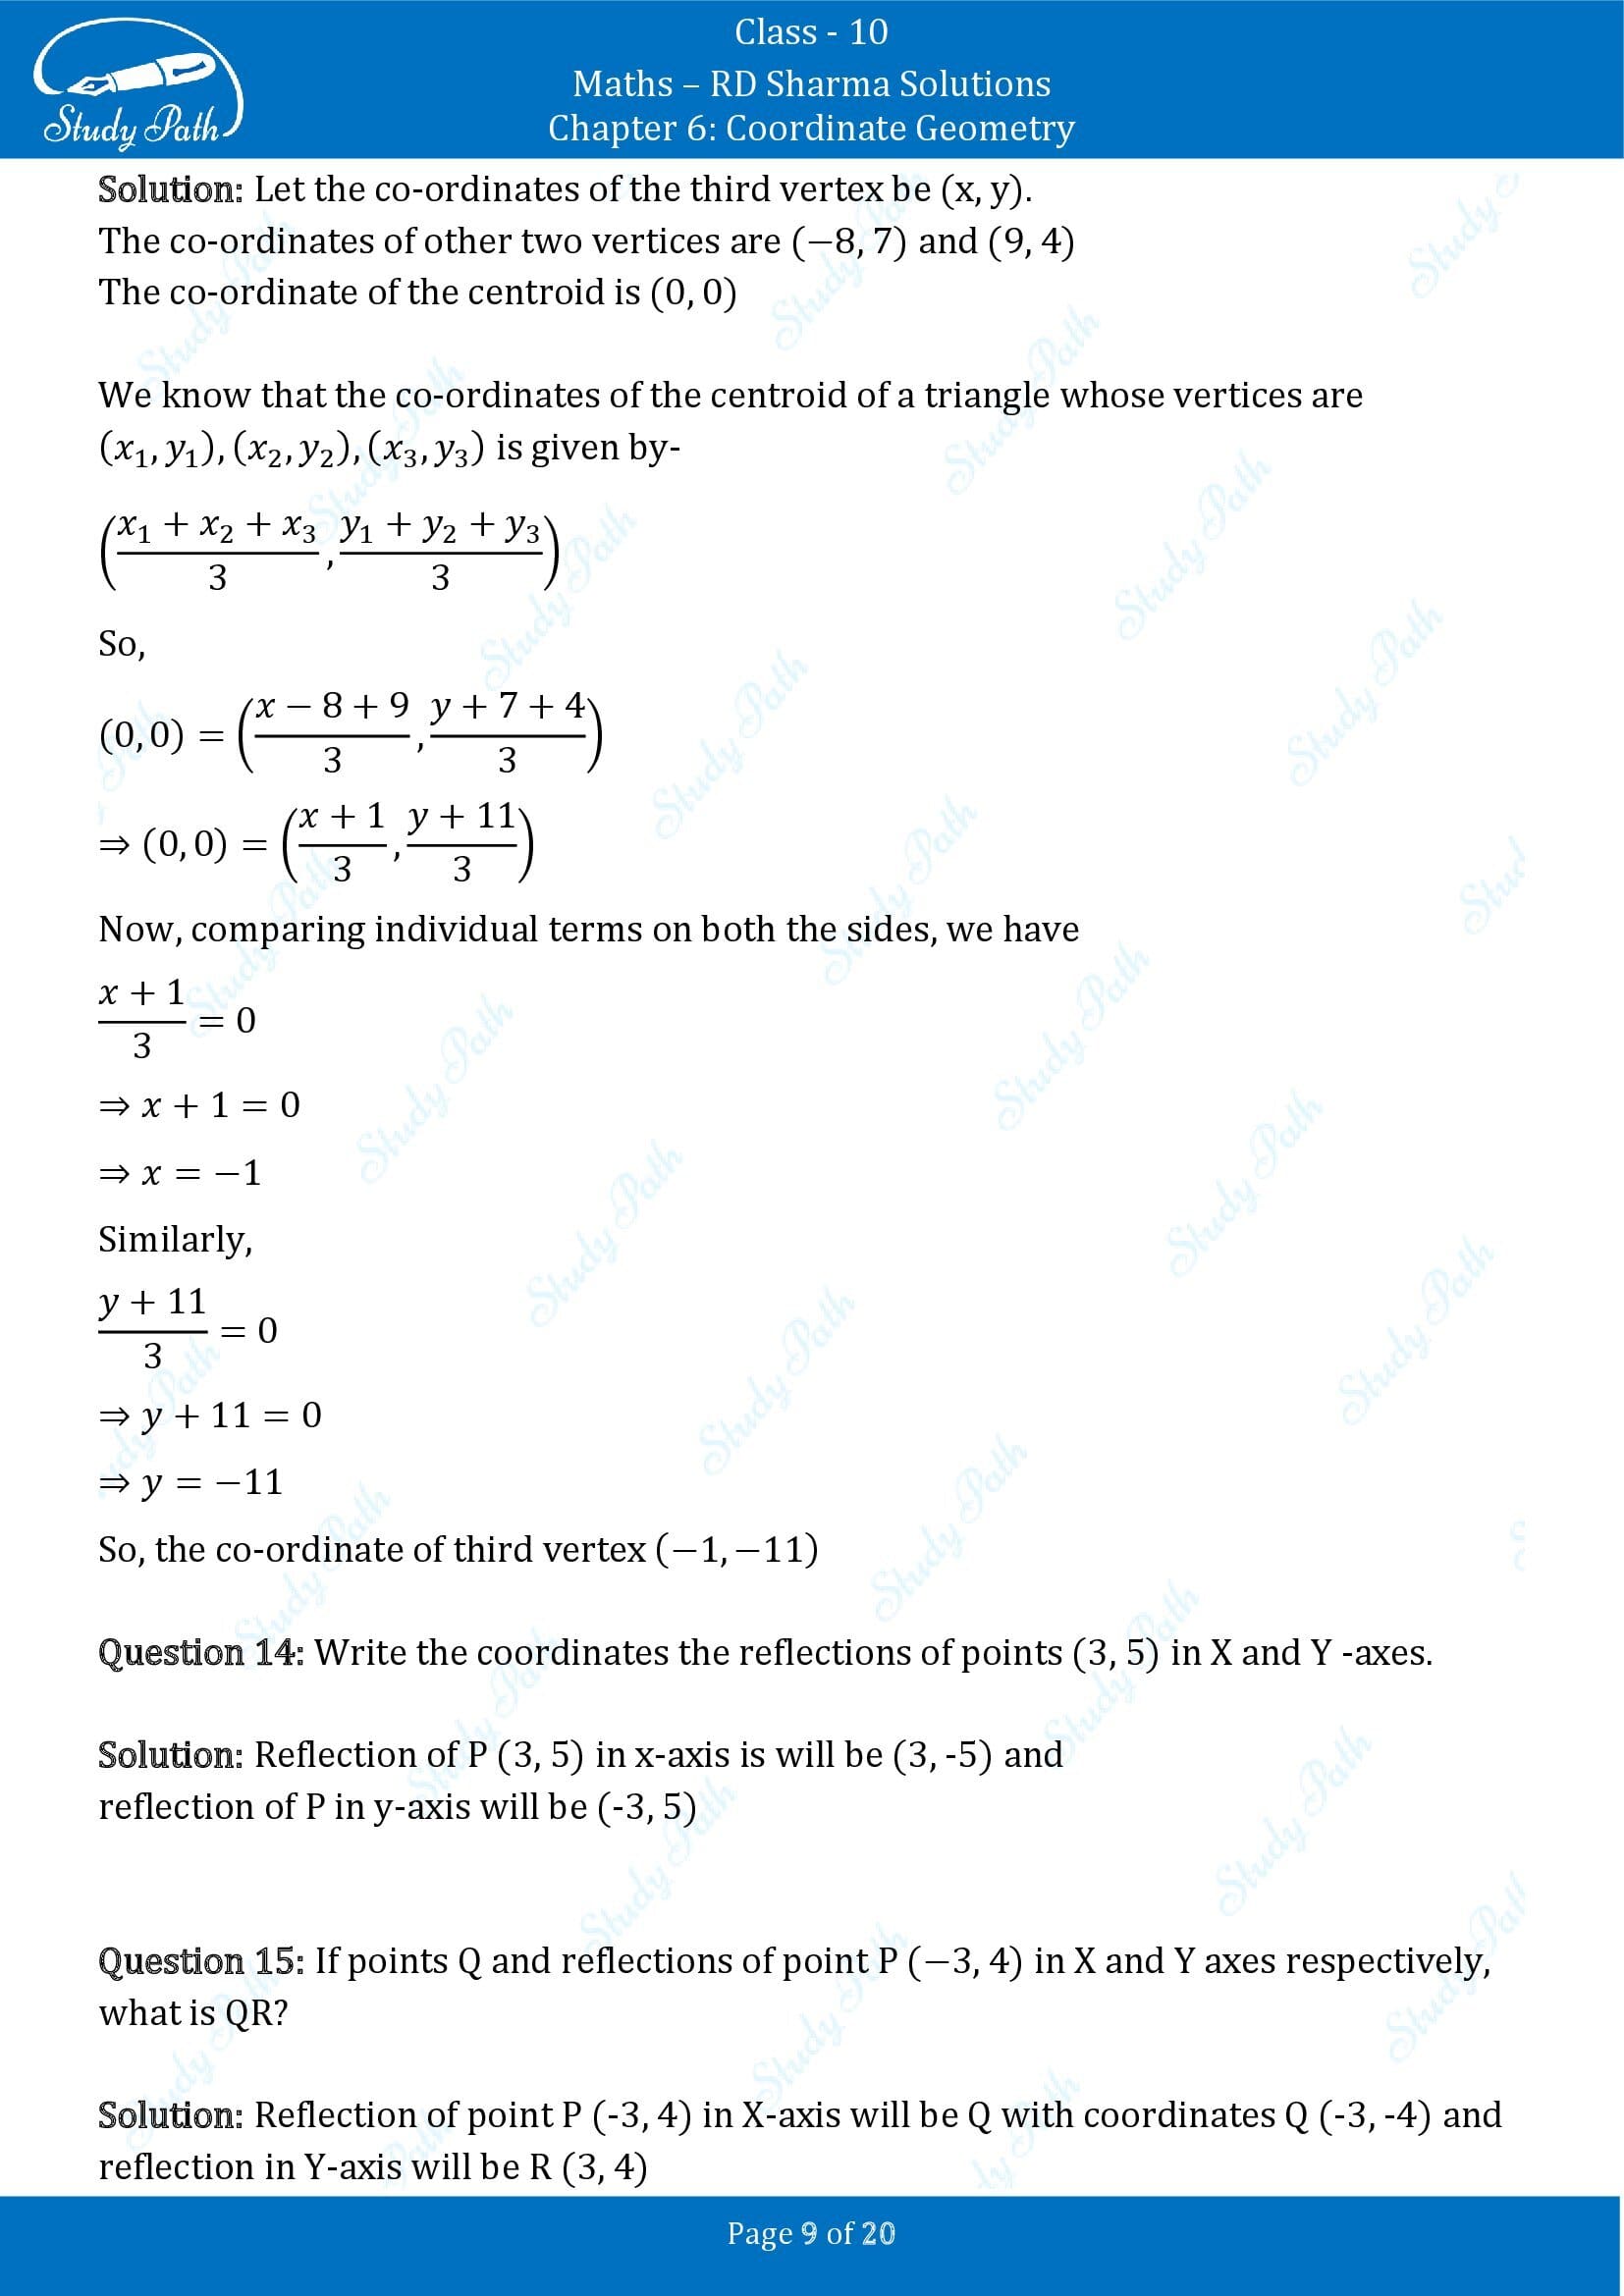 RD Sharma Solutions Class 10 Chapter 6 Coordinate Geometry Very Short Answer Type Questions VSAQs 00009